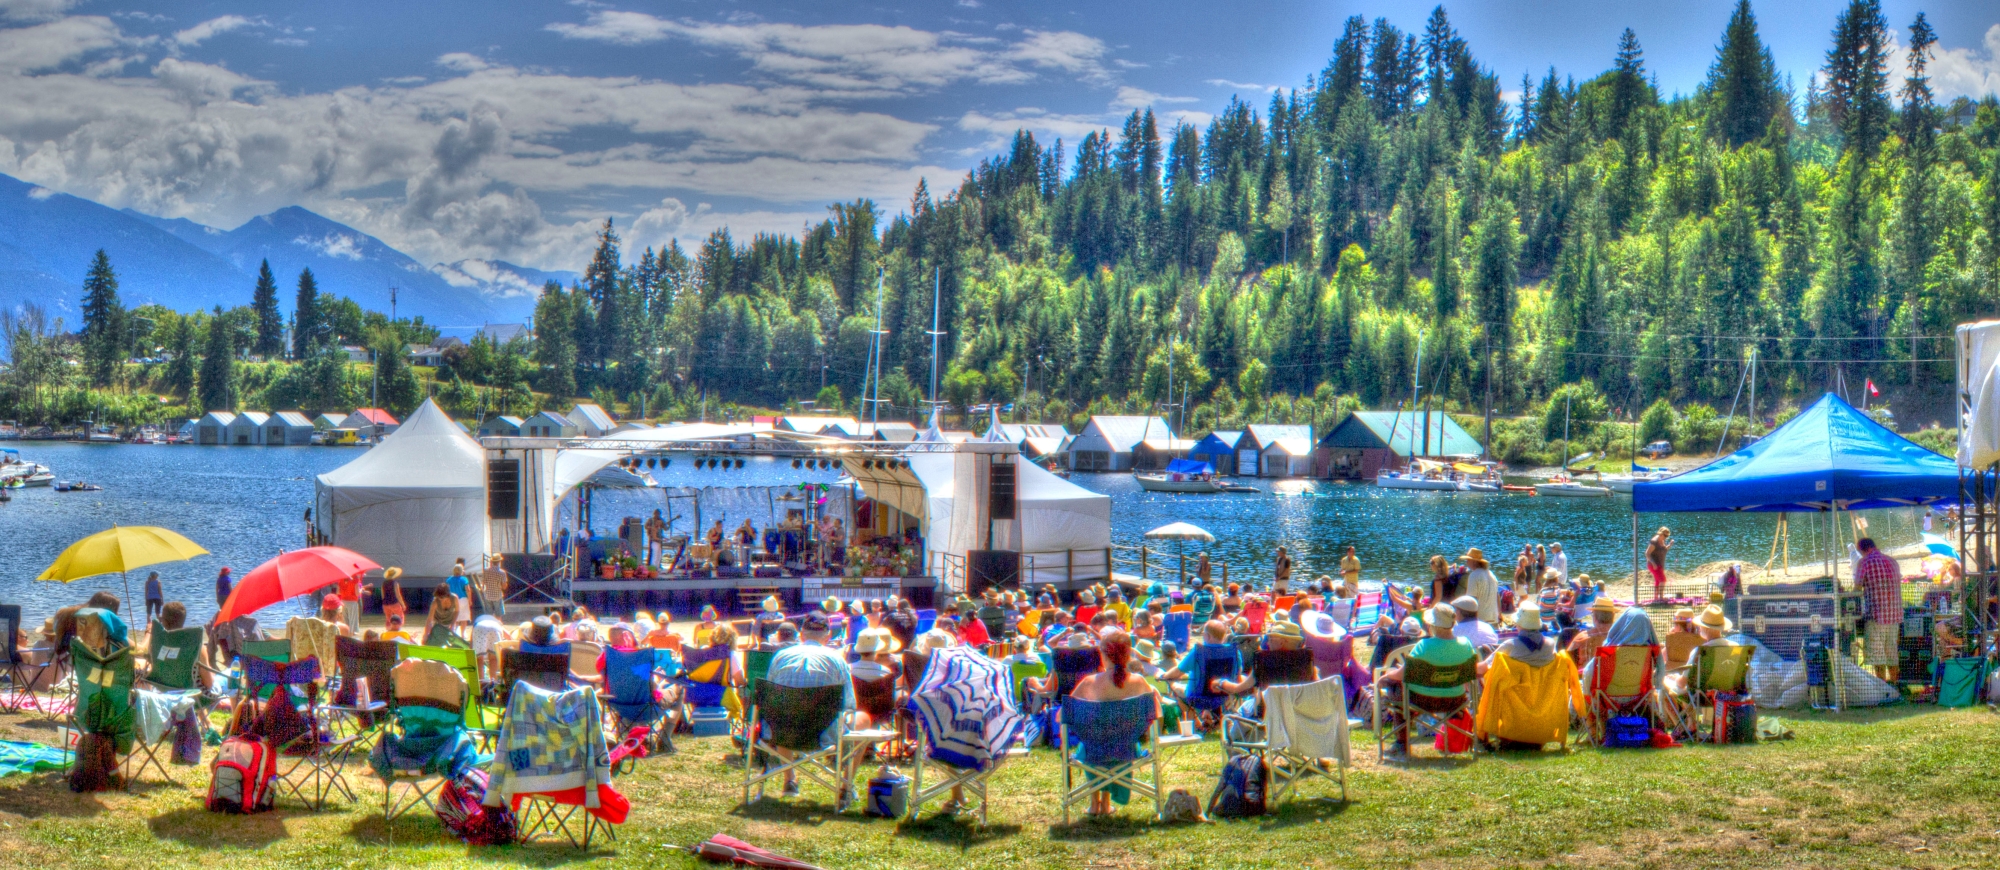 Audience enjoying Kaslo jazz festival stage with mountains and lake in the background